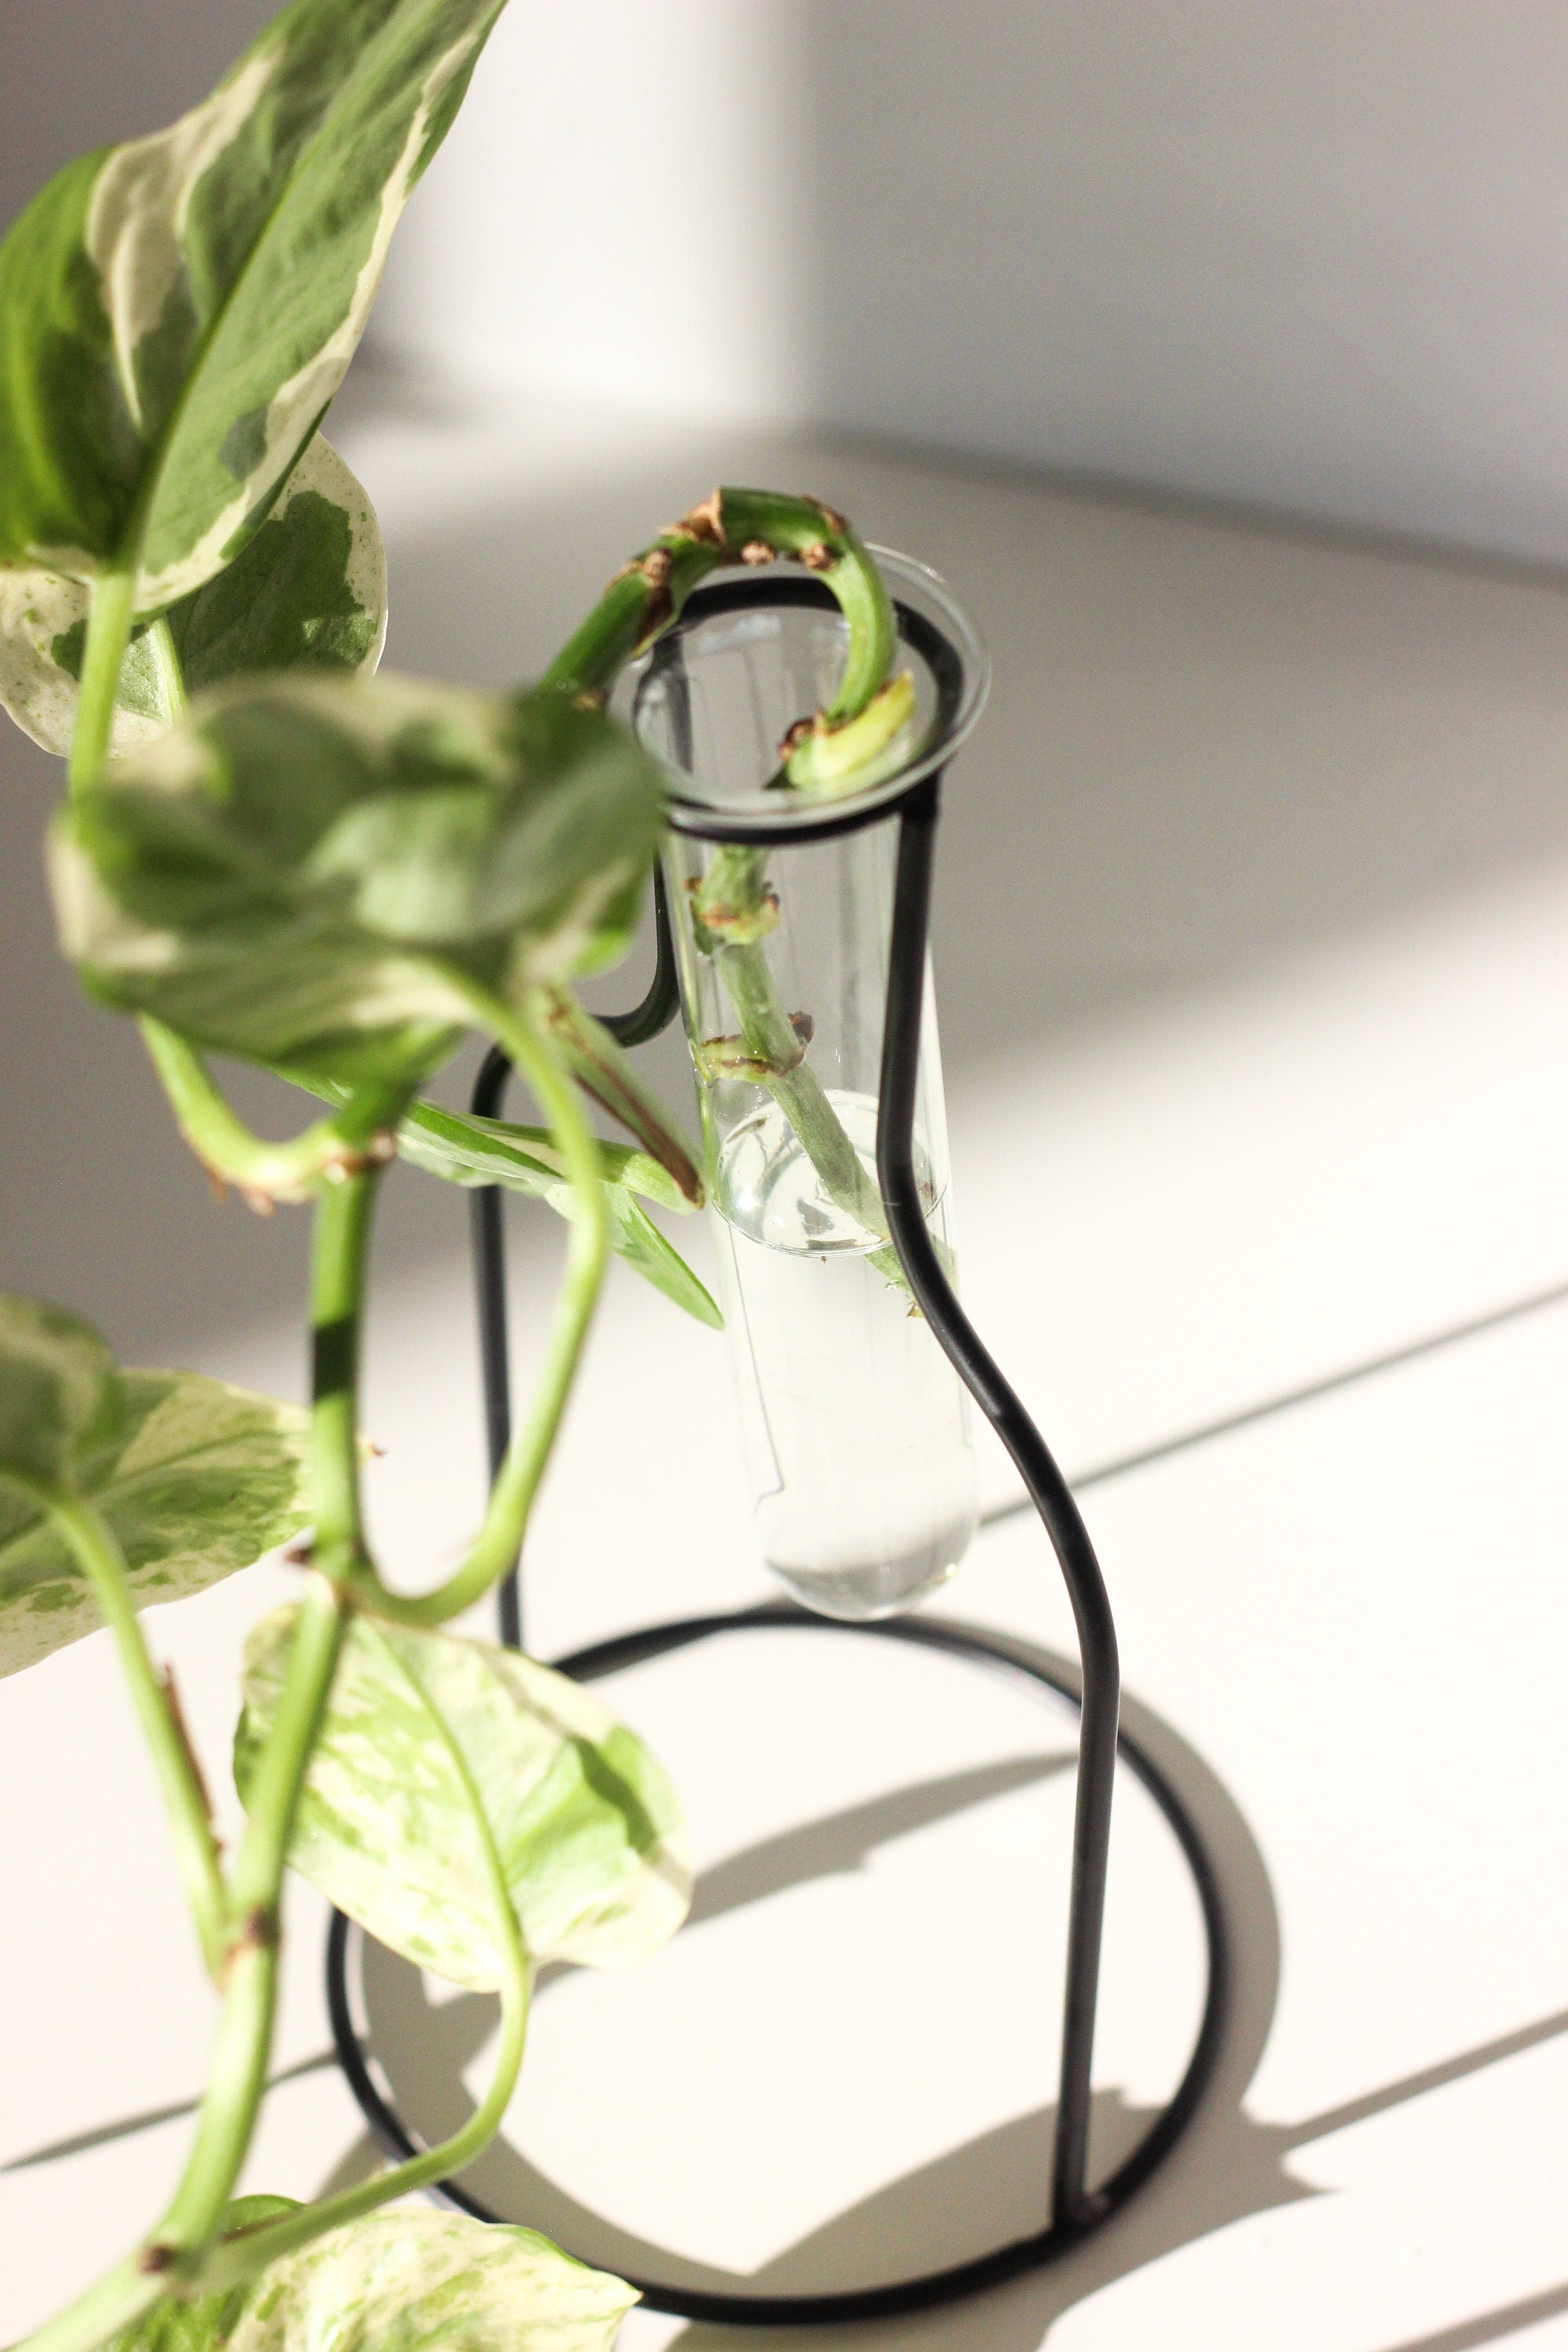 Propagation Station Tube Vase with Black Silhouette Frame